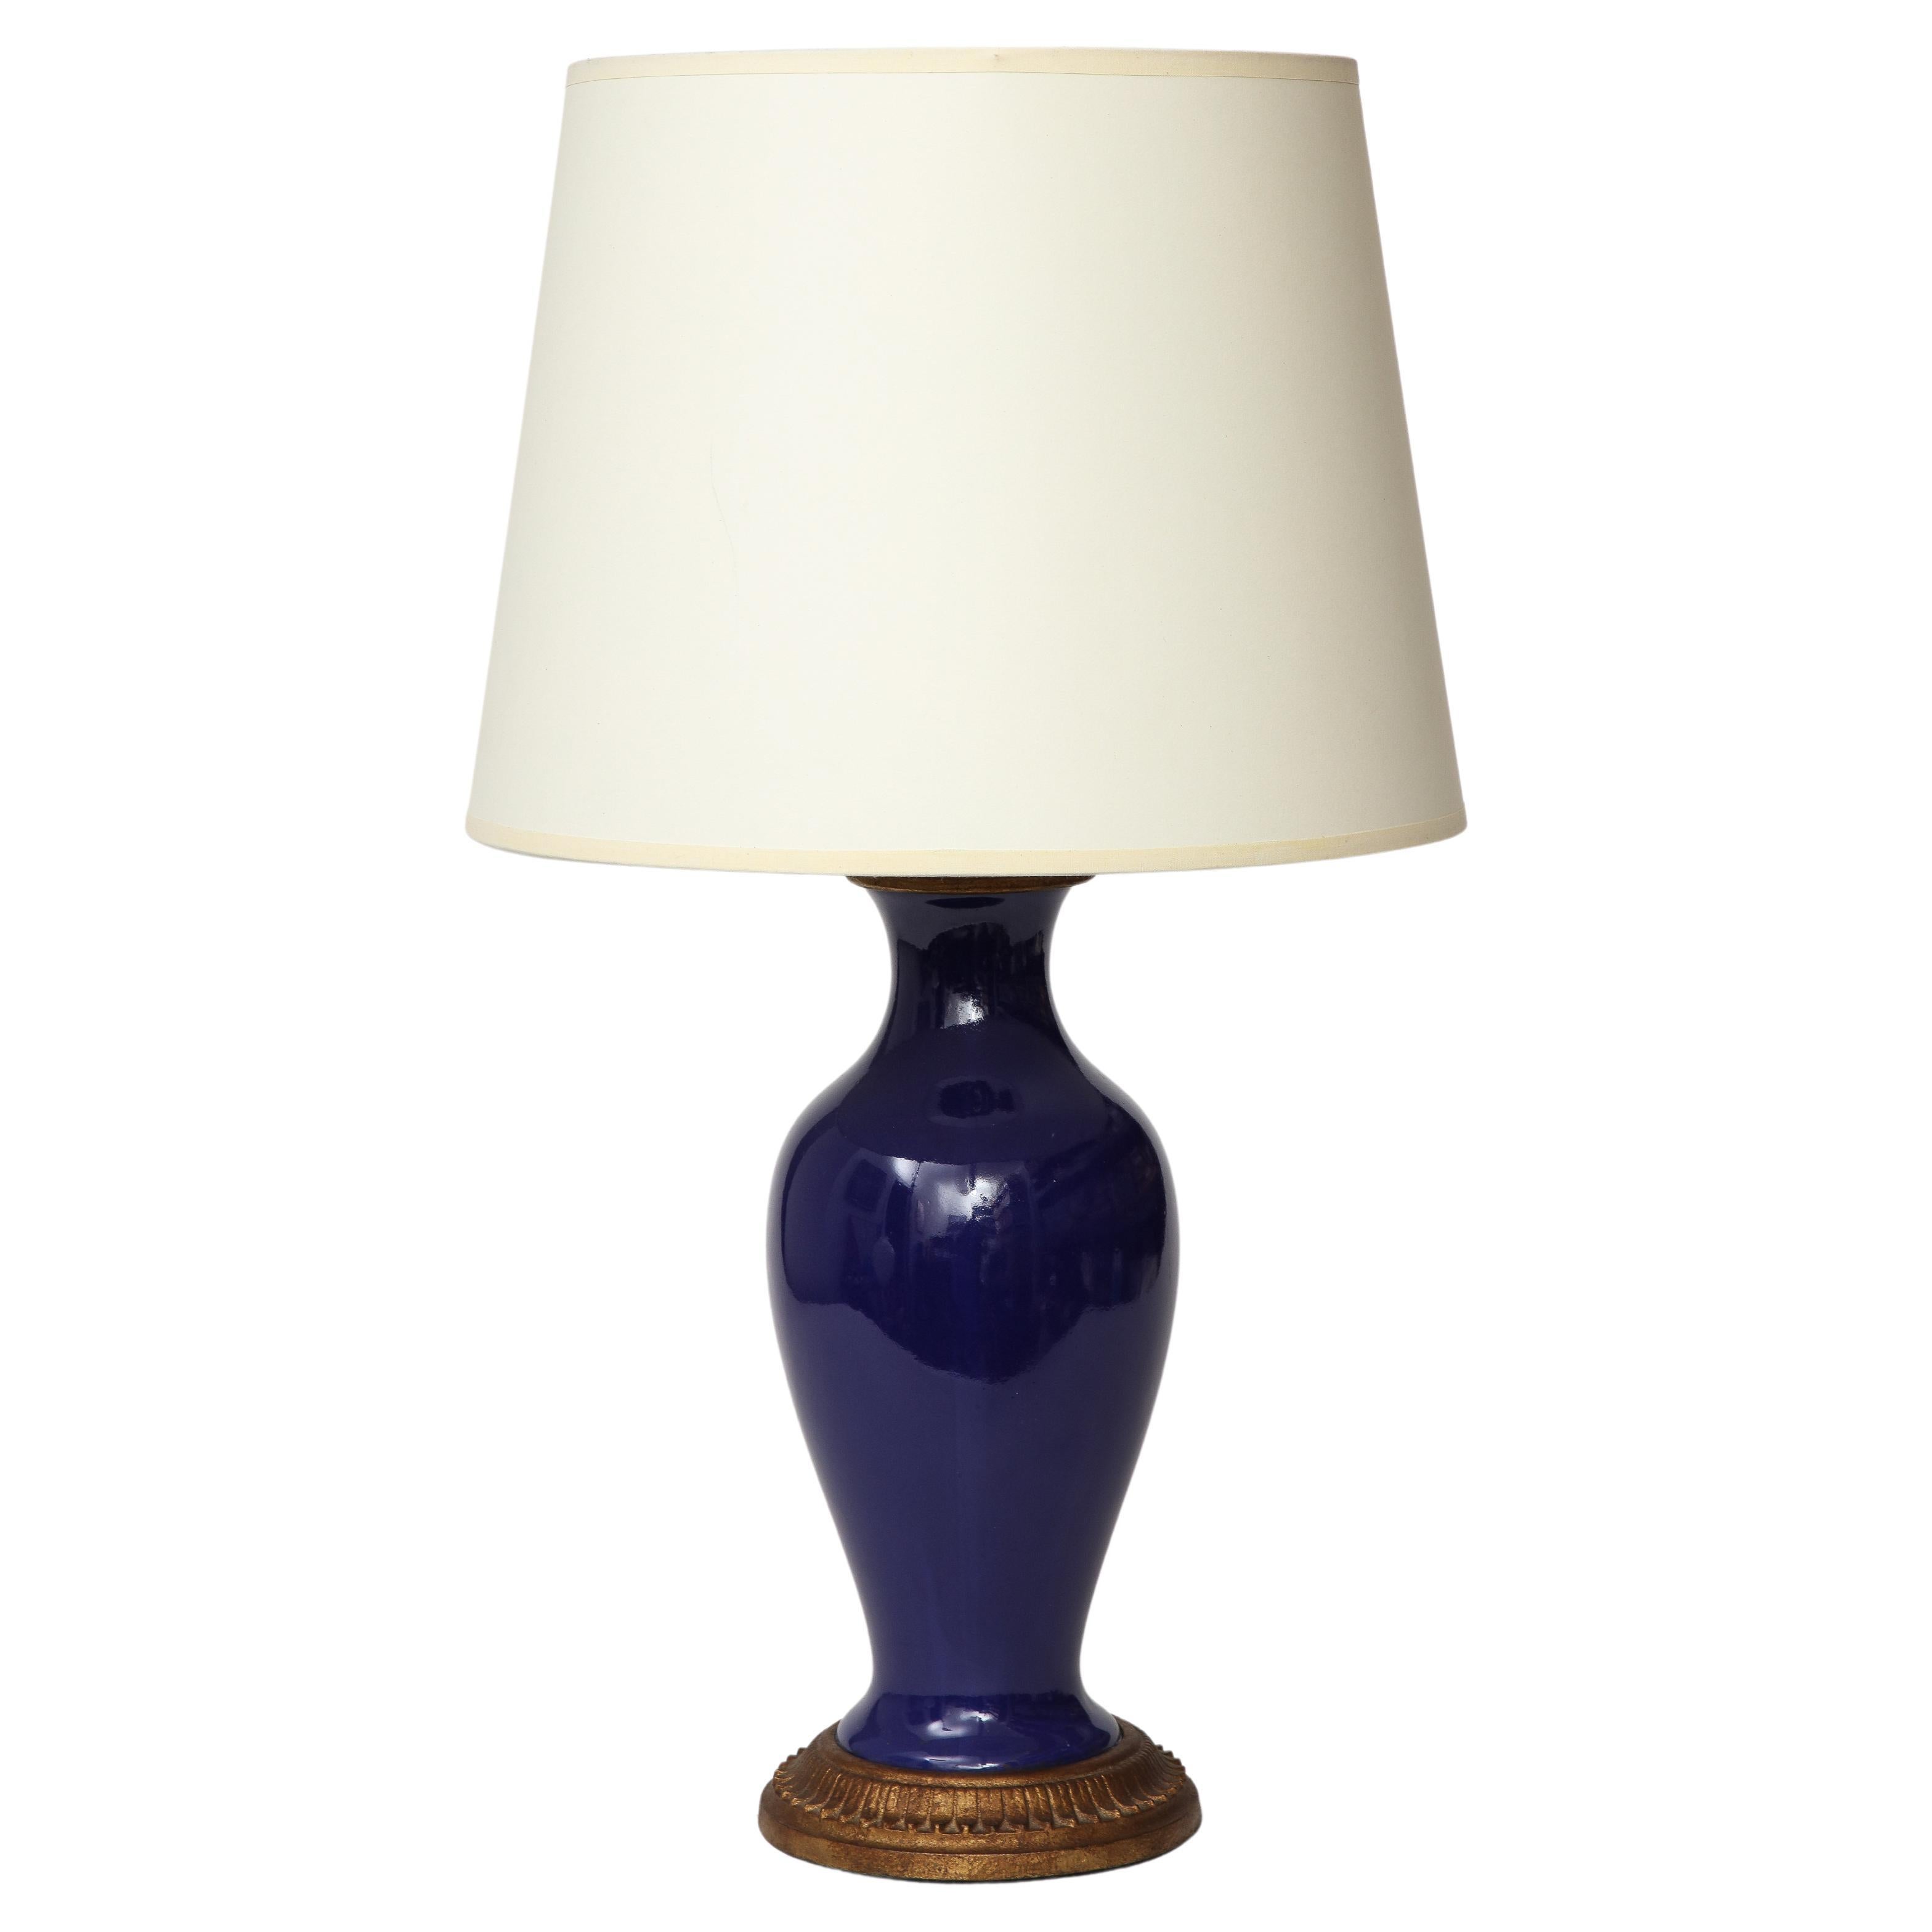 Copper and Lapis Blue Enamel Table Lamp, 20th C. For Sale